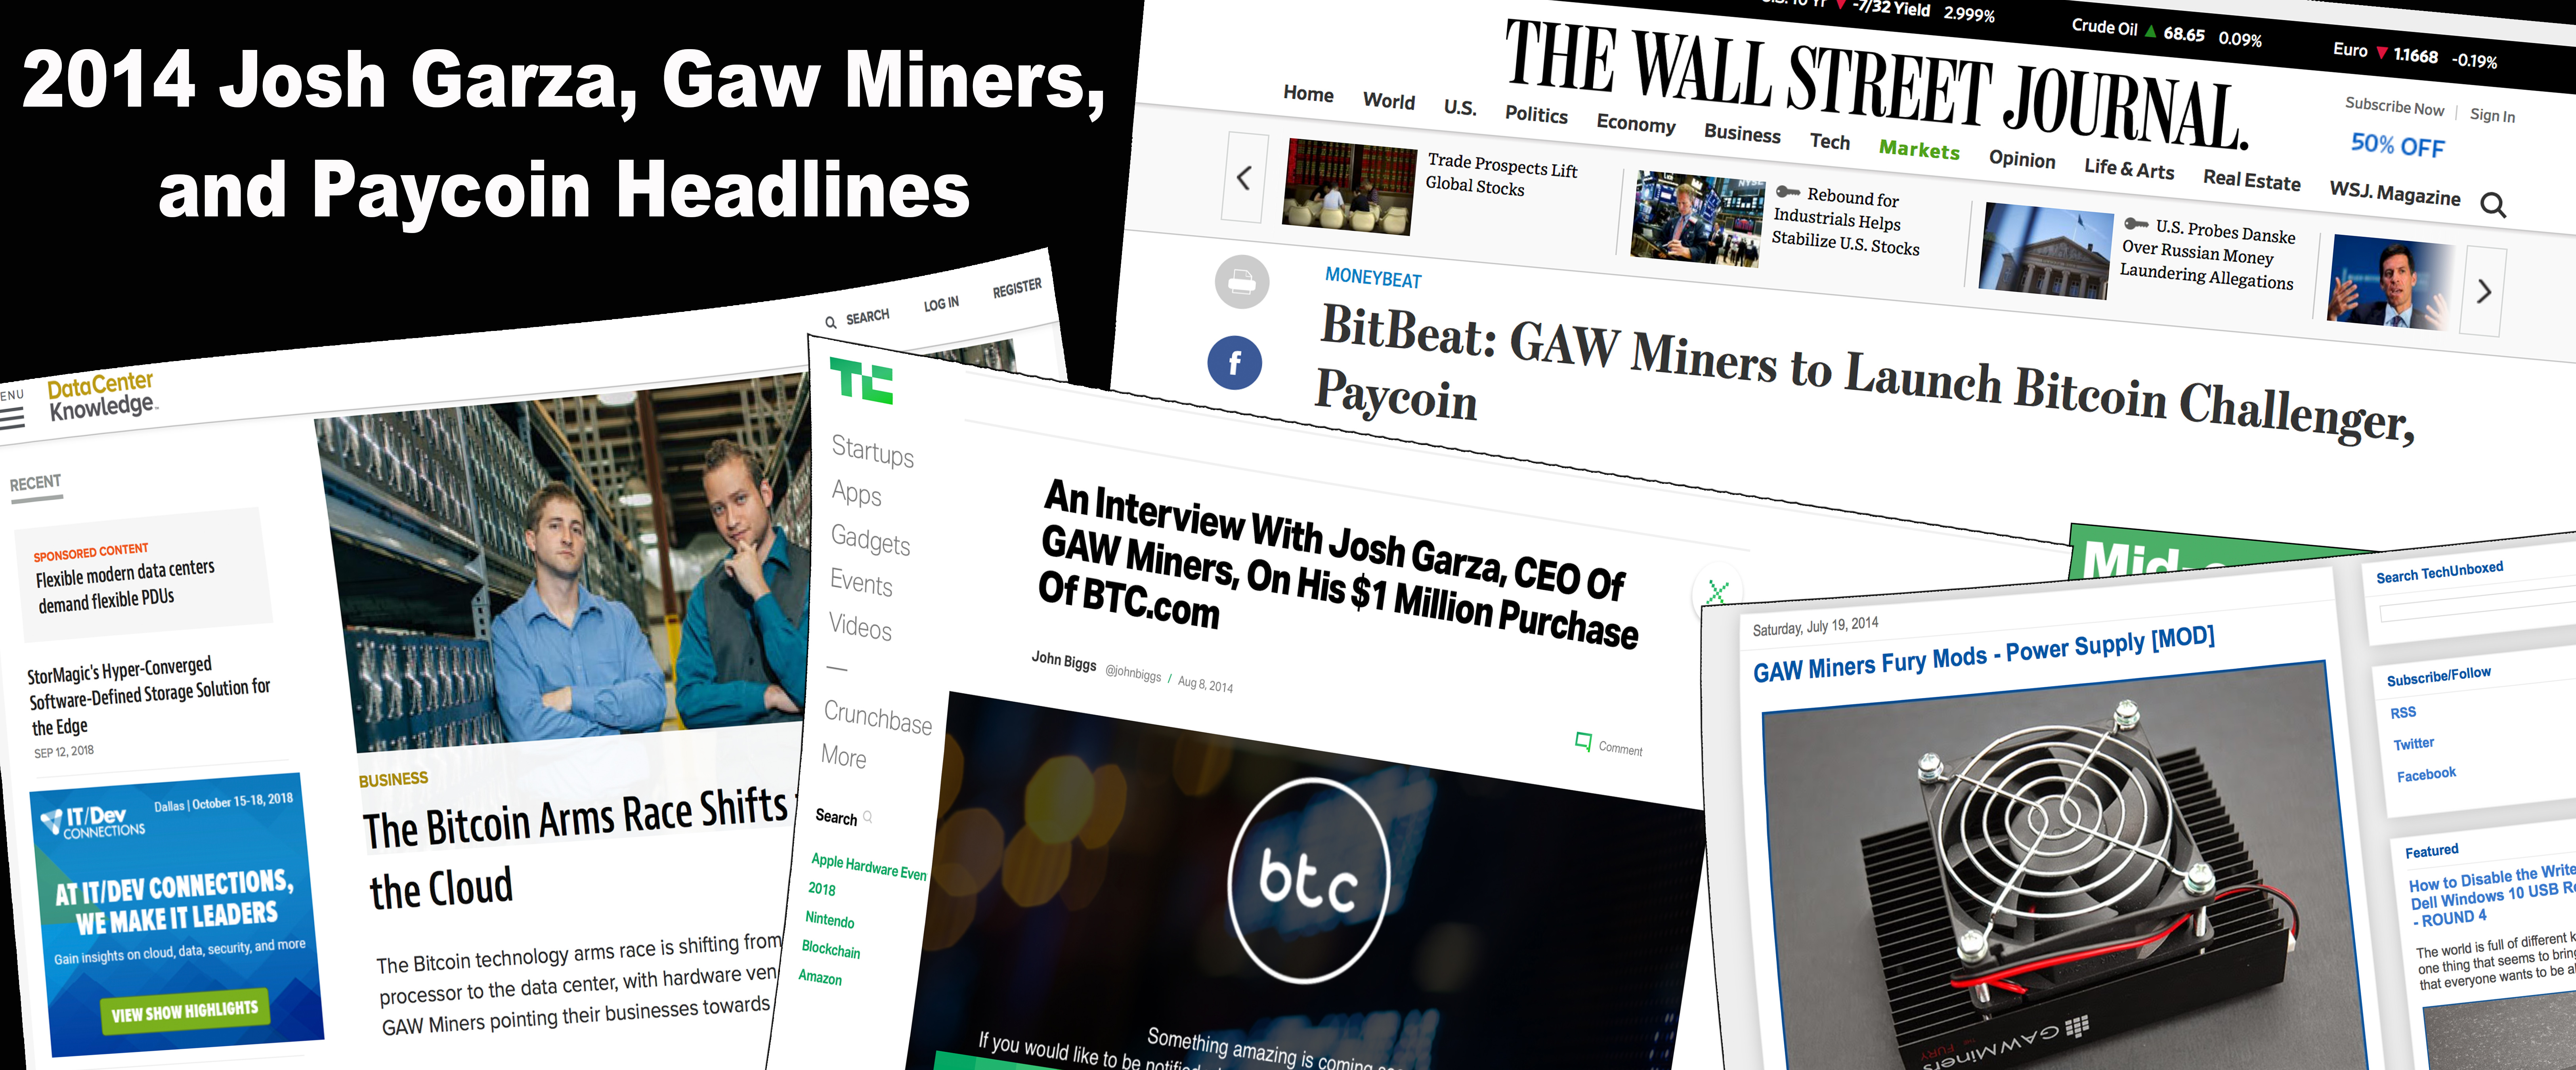 Crypto-Flashbacks: How the Media Pumped the ICO Known as Paycoin 